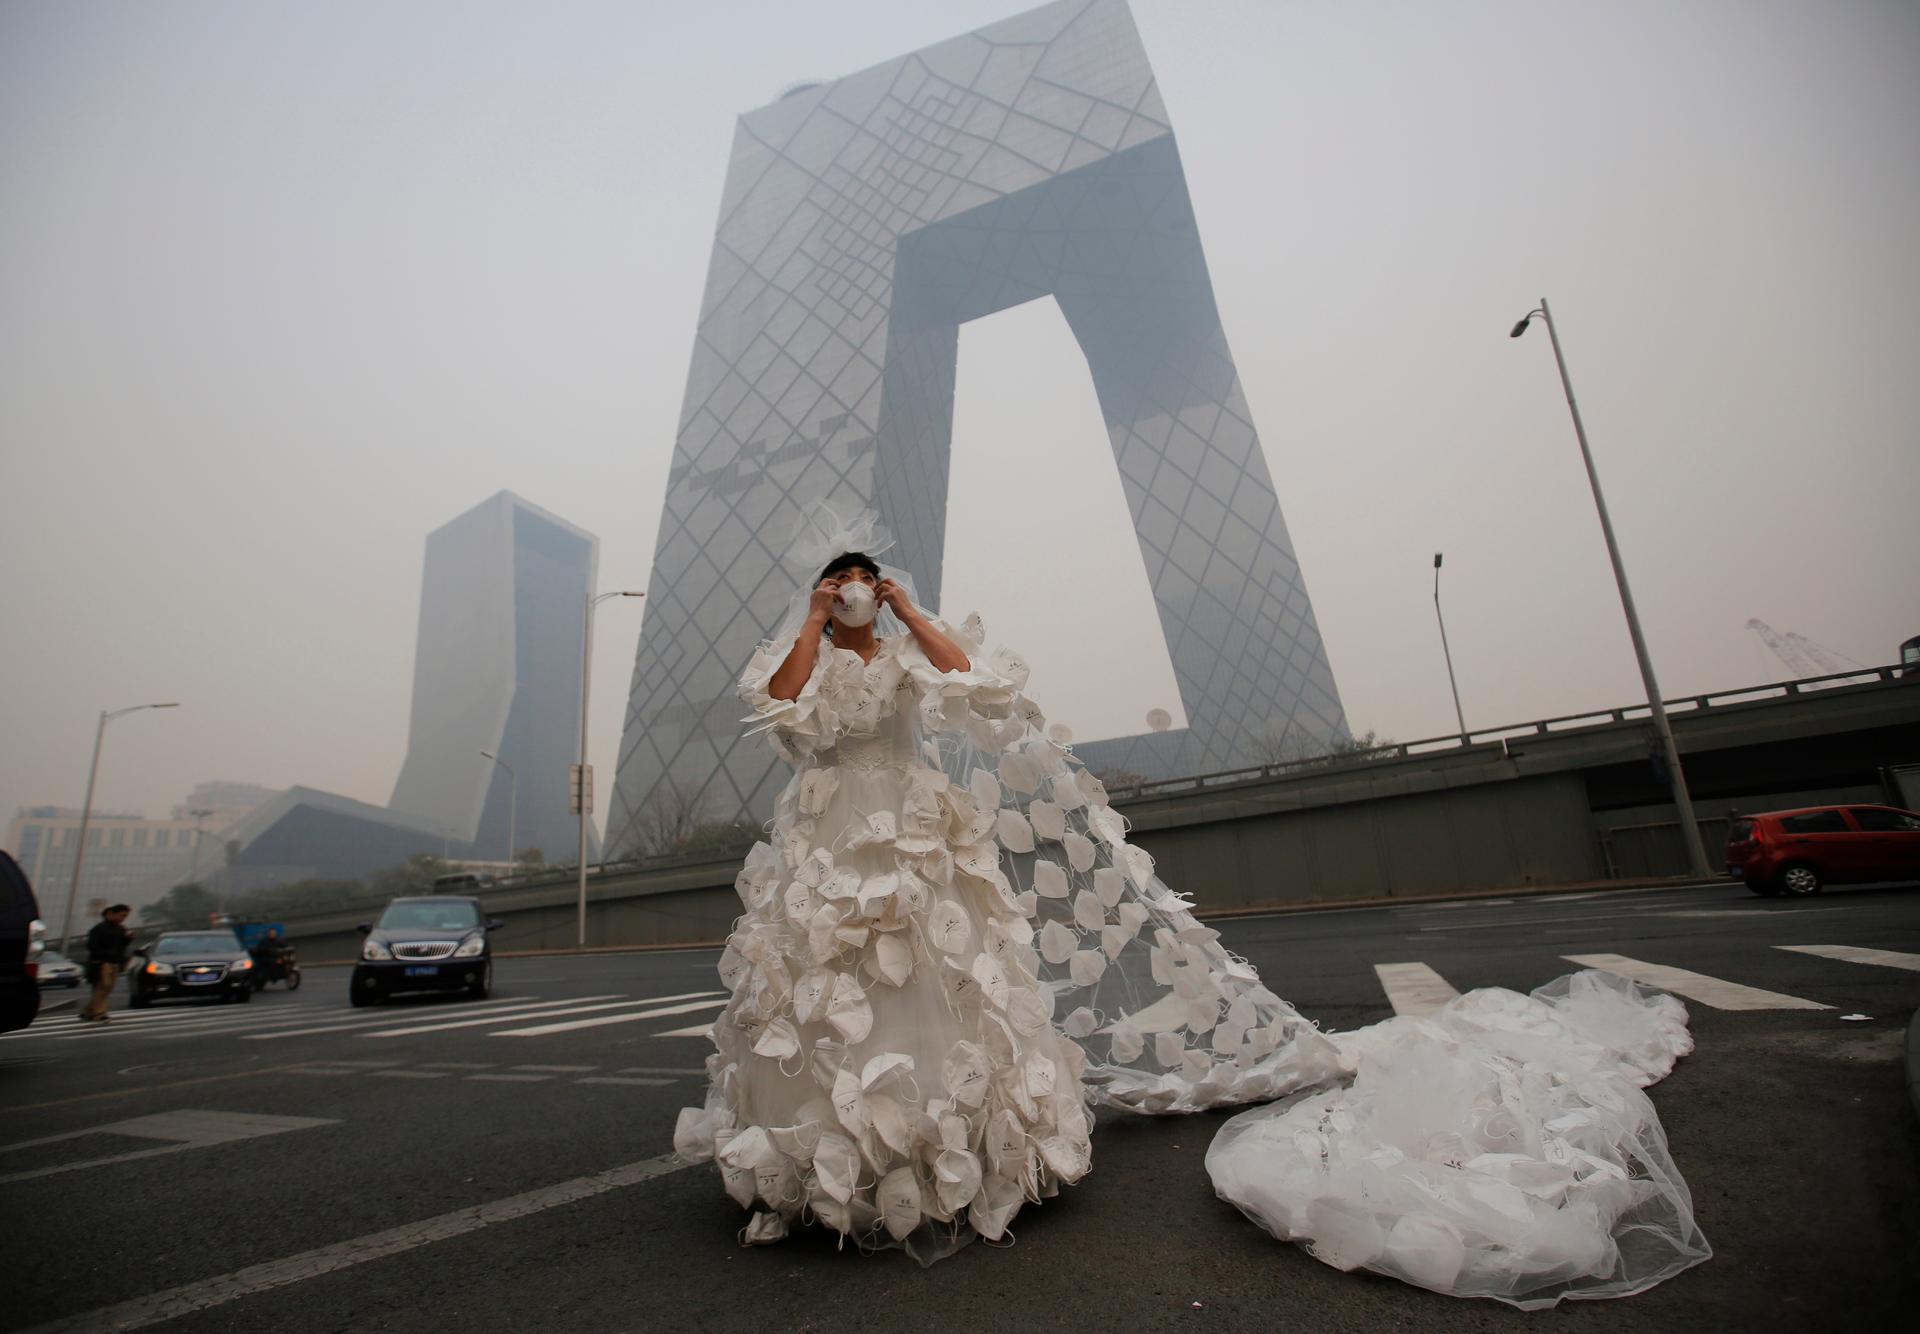 Kong Ning wears a wedding dress decorated with 999 face masks for her performance art work 'Marry the blue sky' as she poses for a photograph in front of the China Central Television (CCTV) Headquarters on a hazy day in Beijing November 19, 2014. 